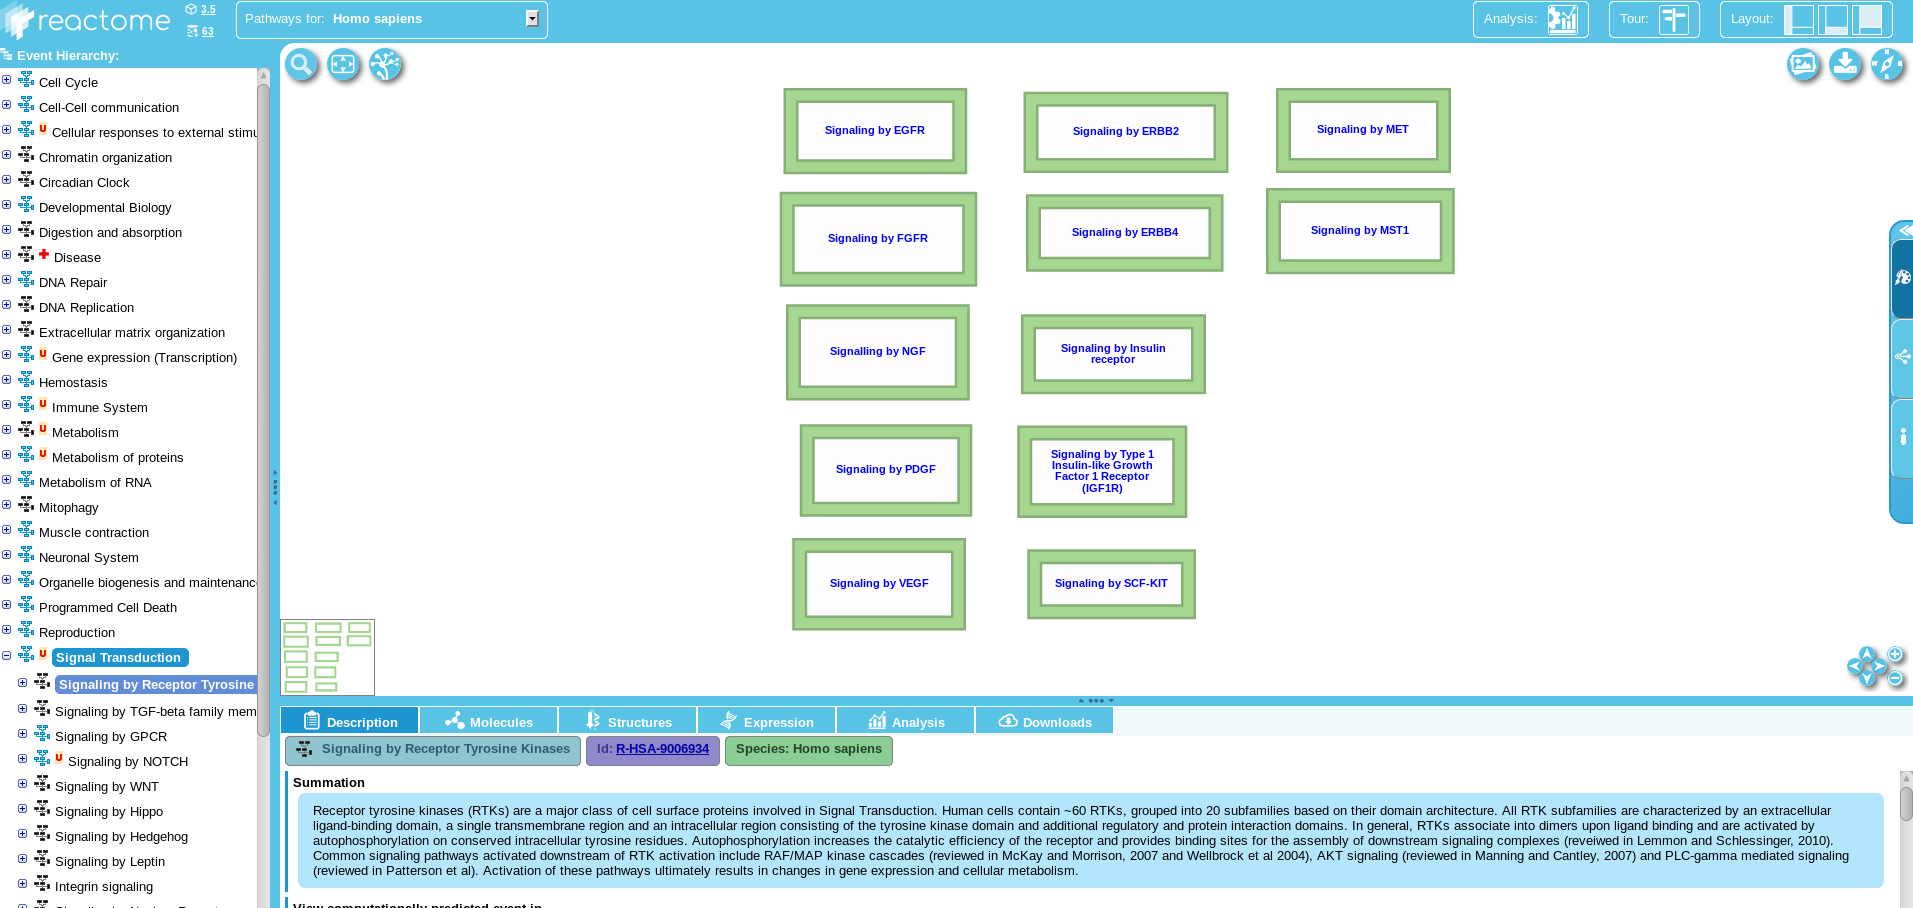 ../../_images/pathway_analysis_reactome.png